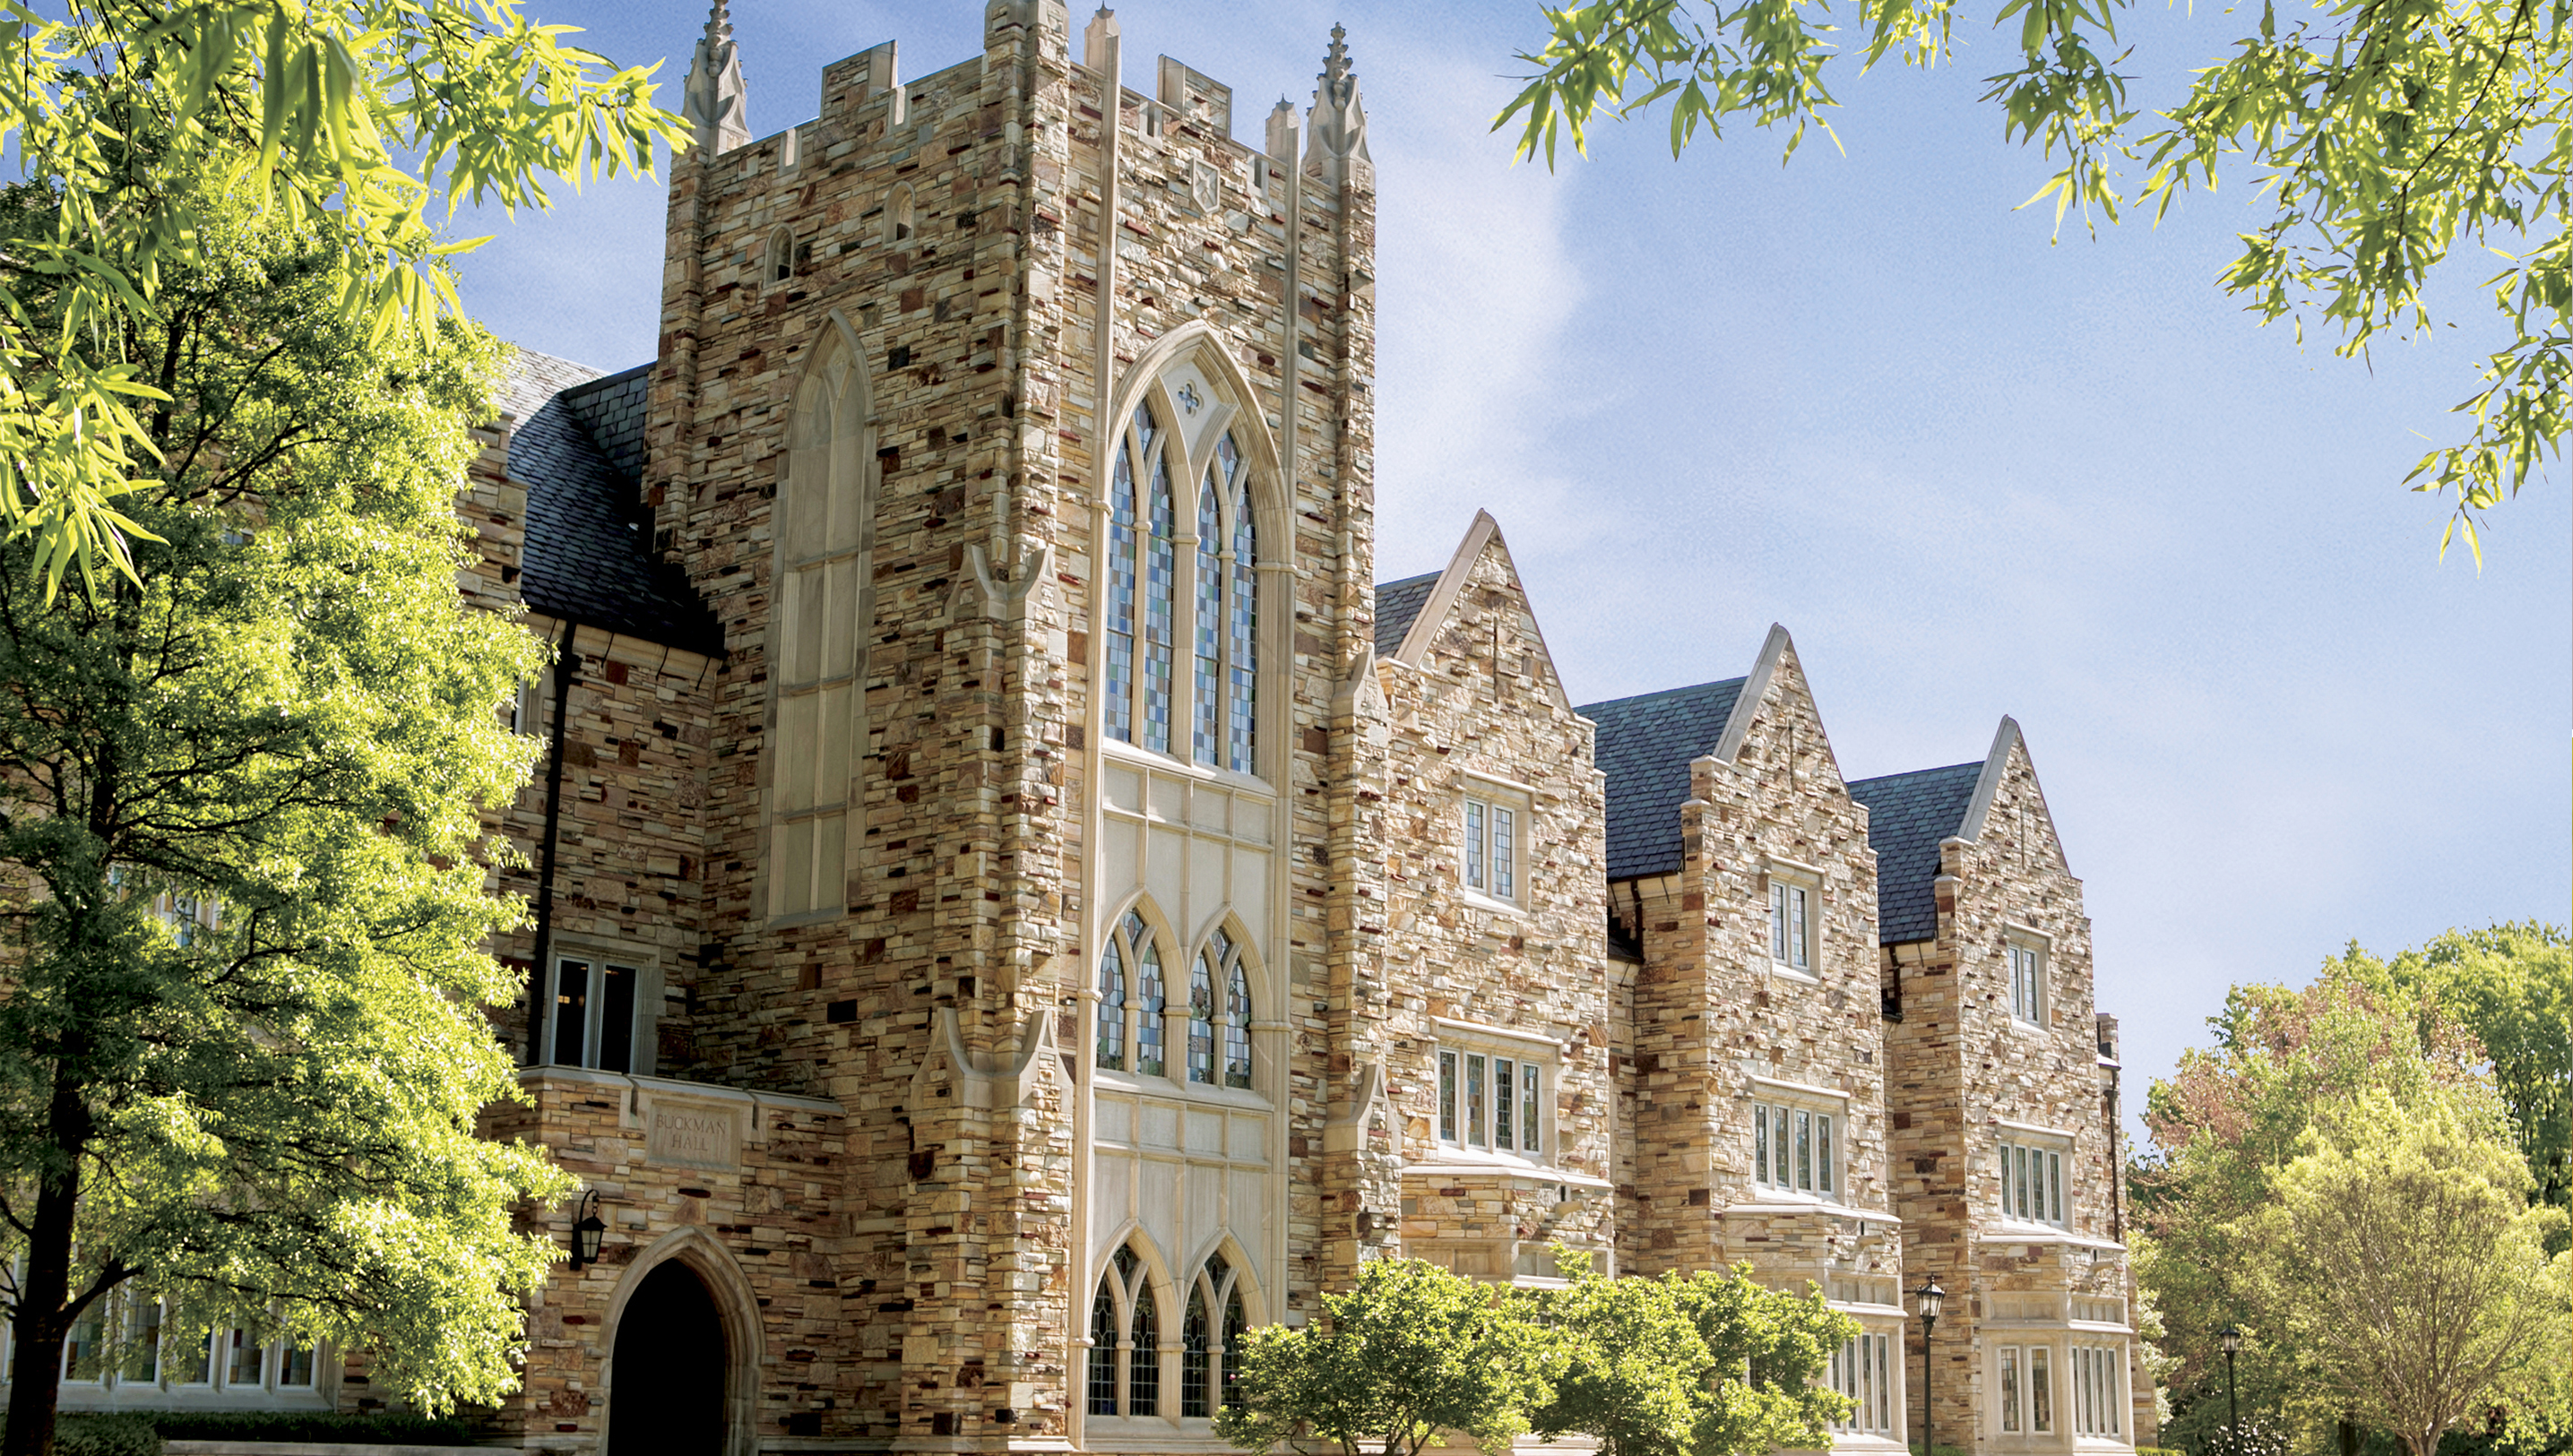 Buckman Hall, a large Gothic stone building